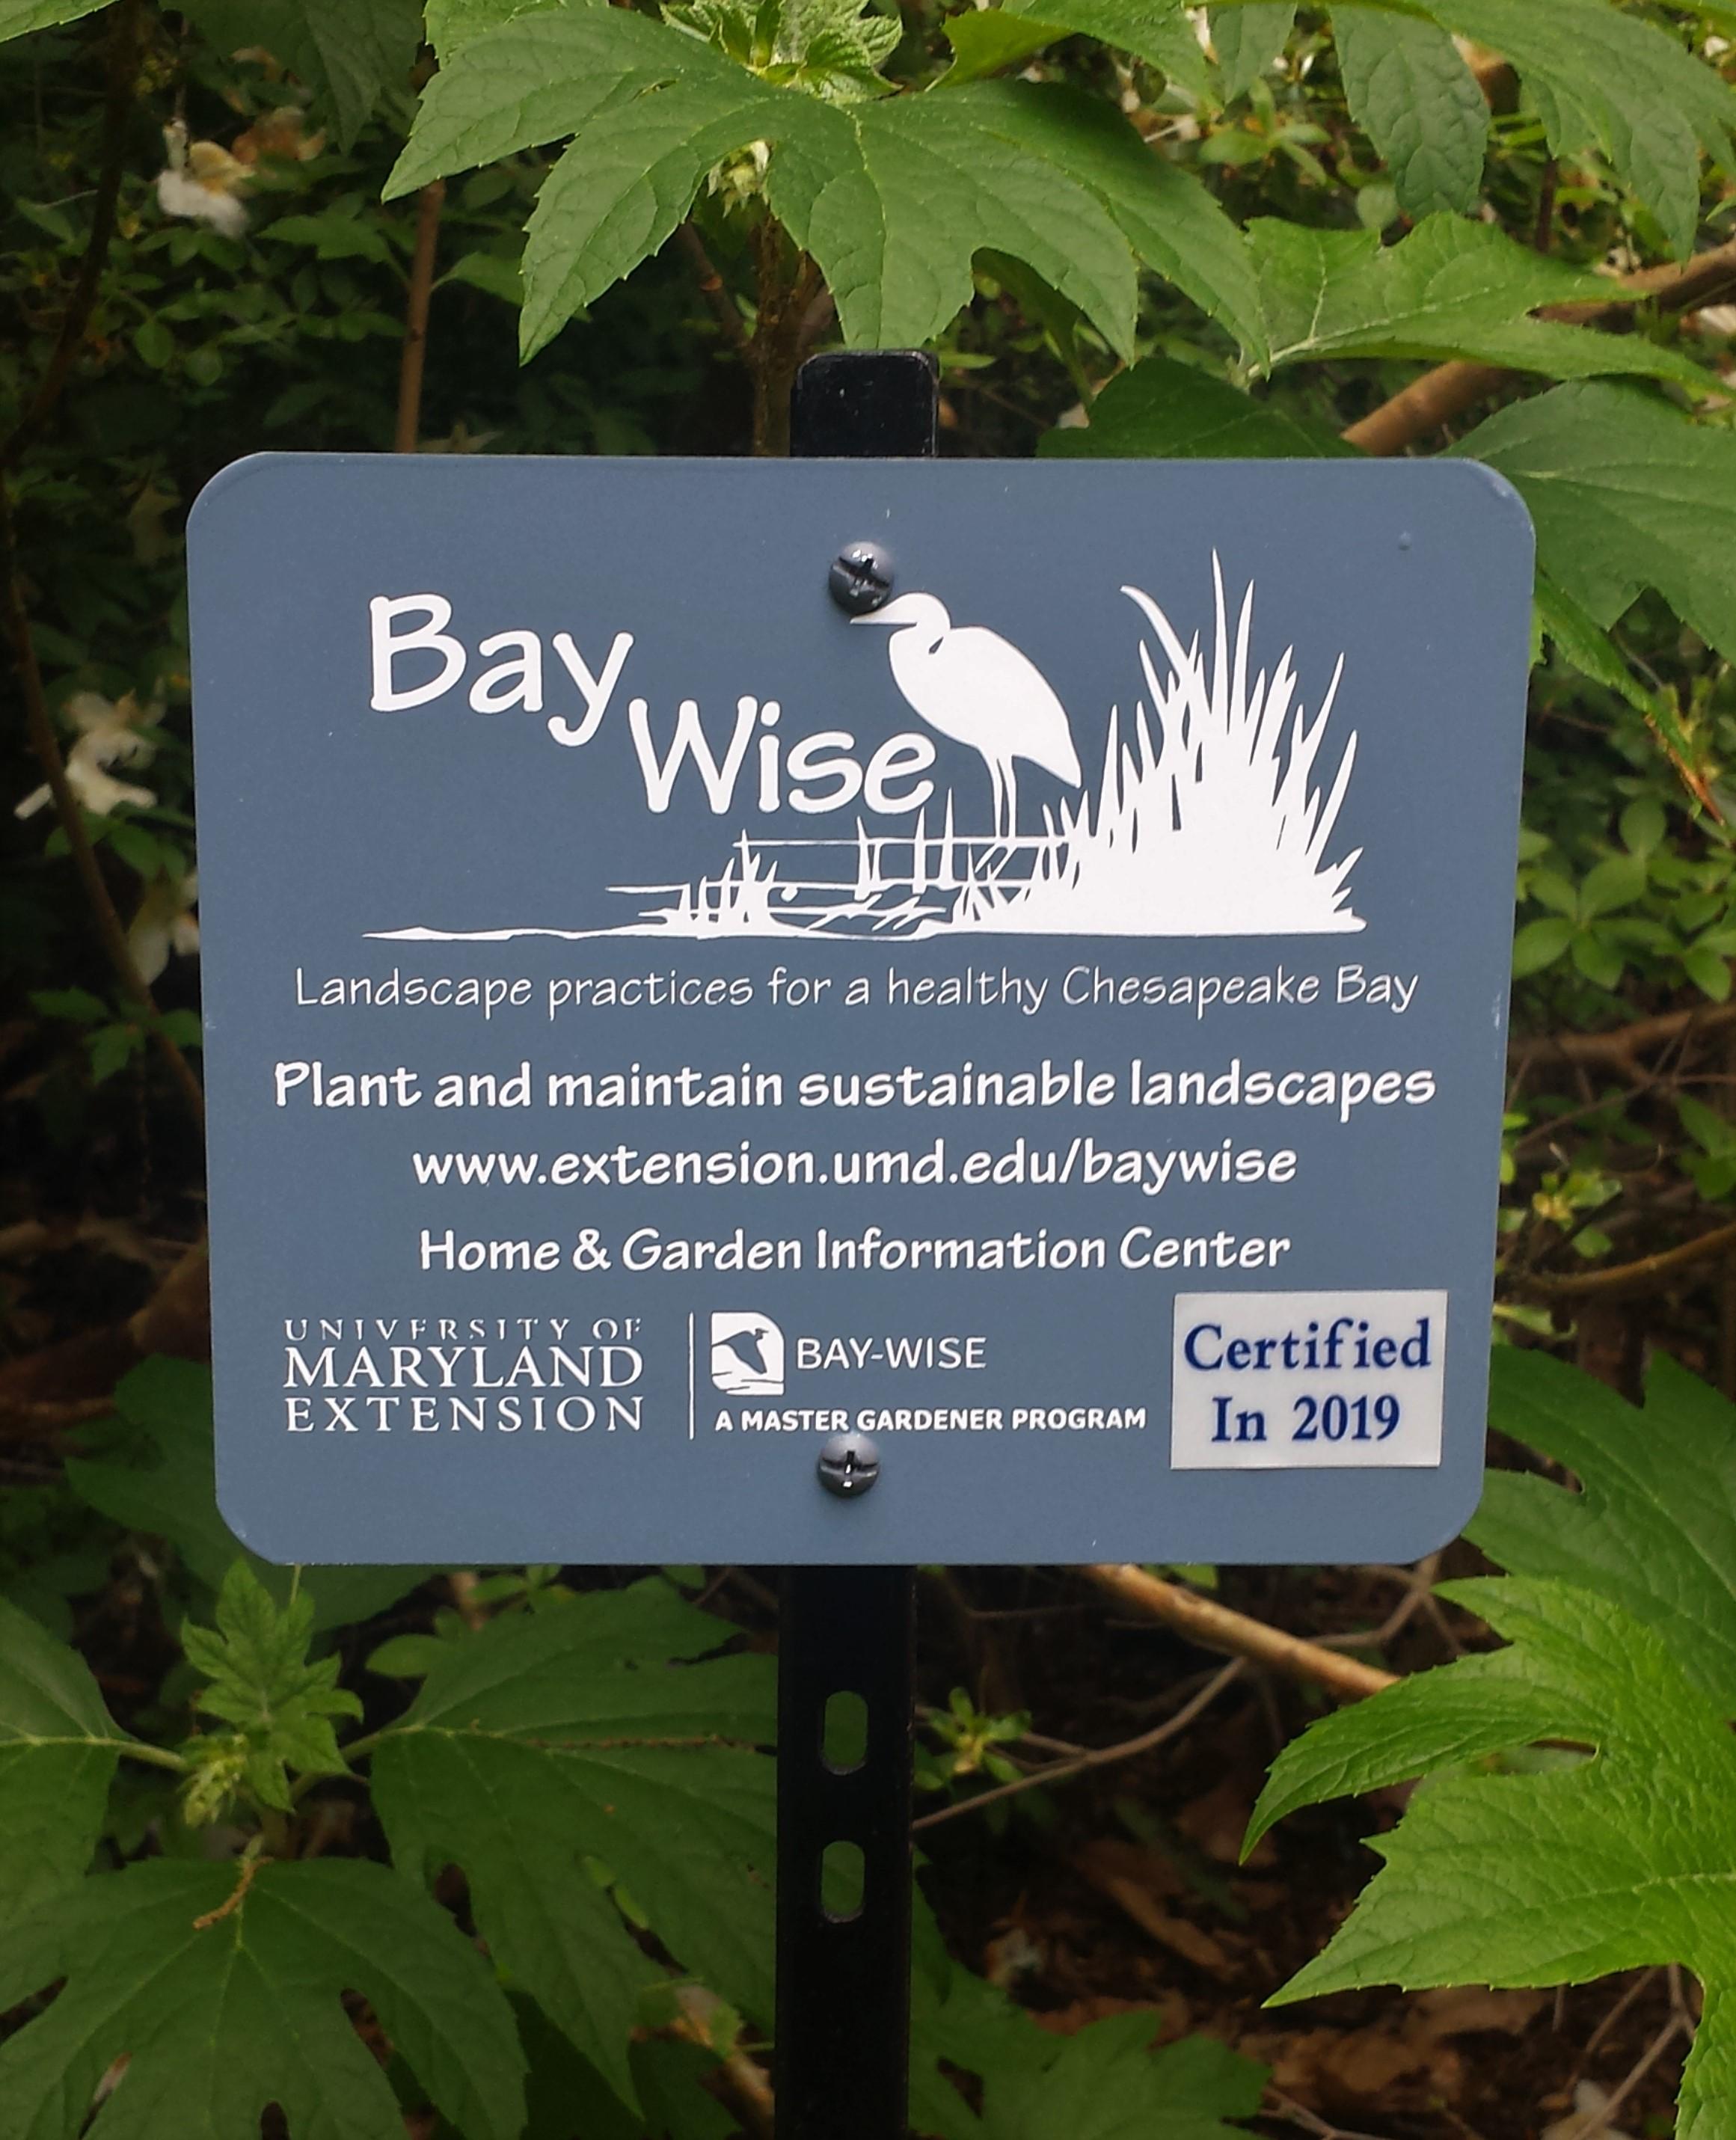 Bay-Wise